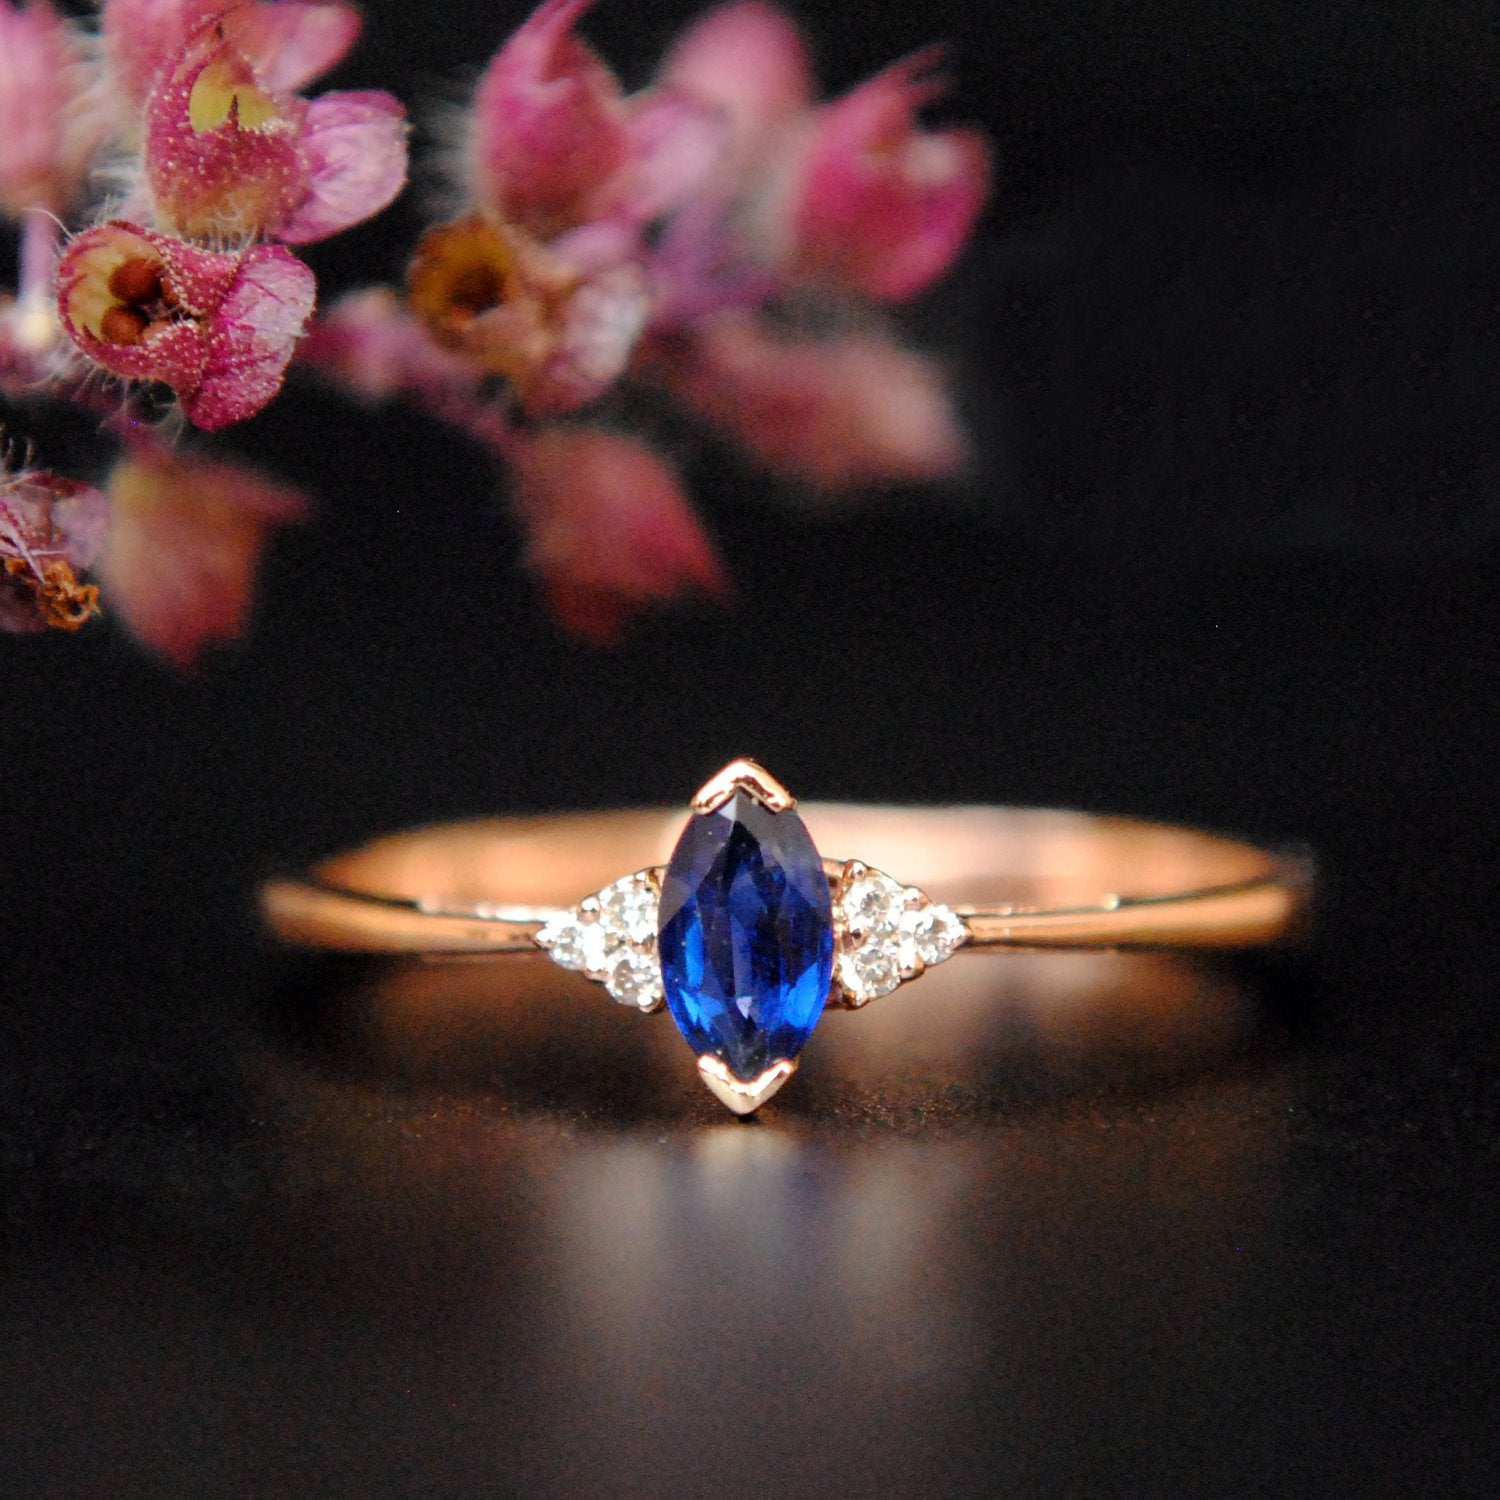 Unique Teal & Blue Sapphire Engagement Rings NZ | Custom Made